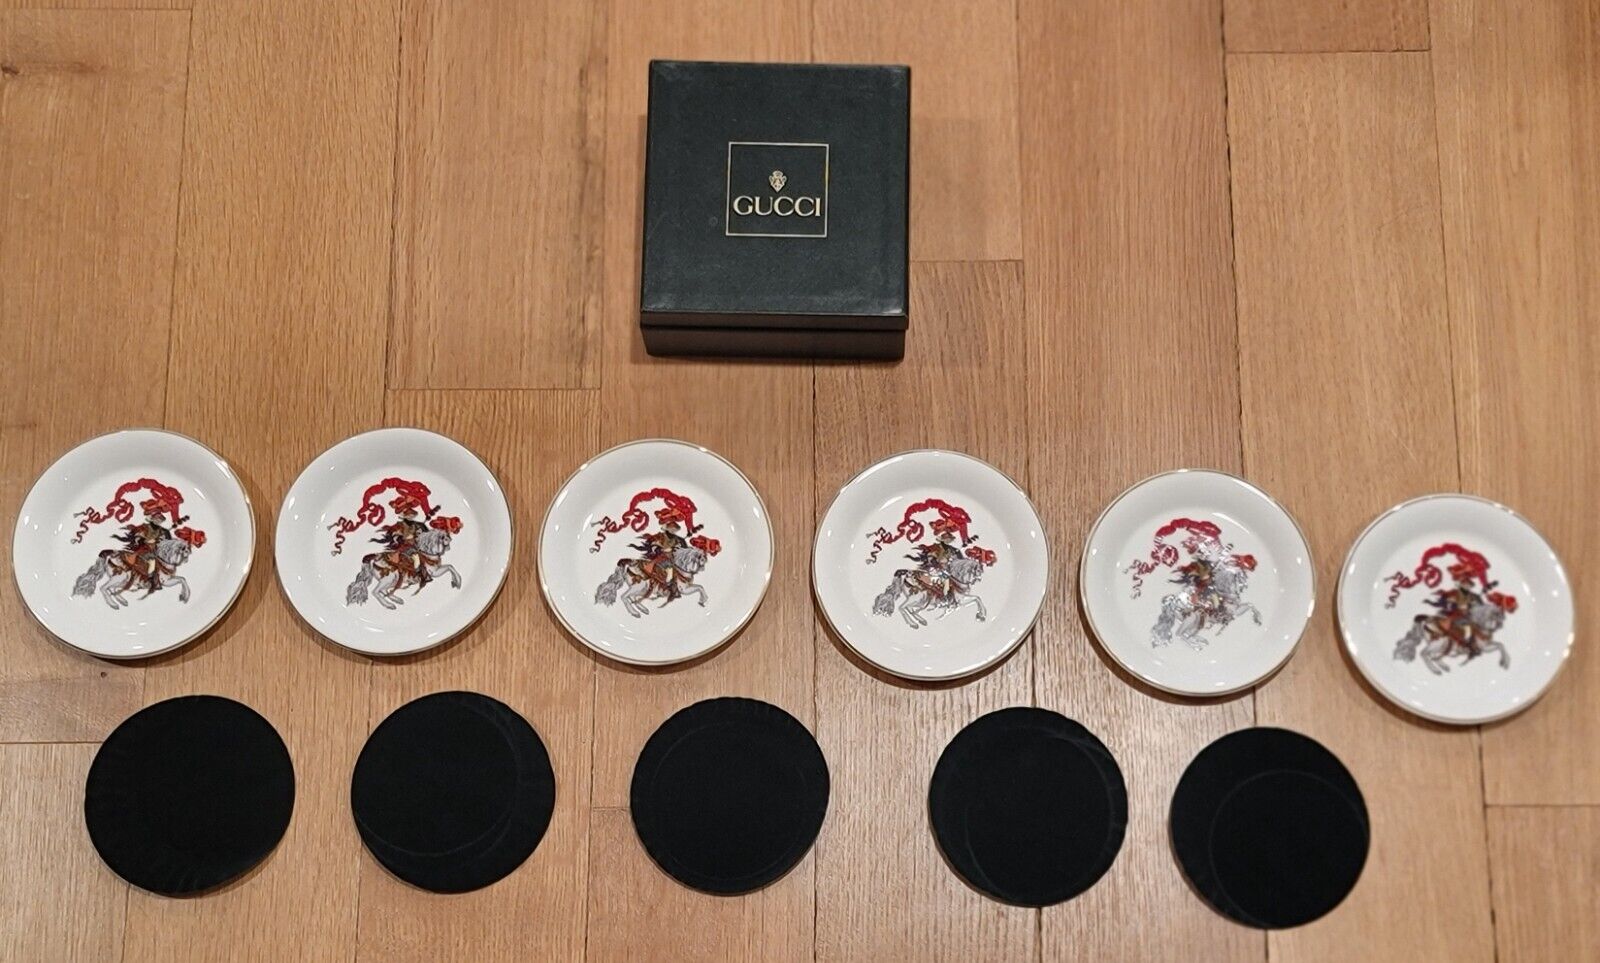 Vtg GUCCI Red Knight Hors d' Overve's Plates (6) Piece Set in Orig. Box